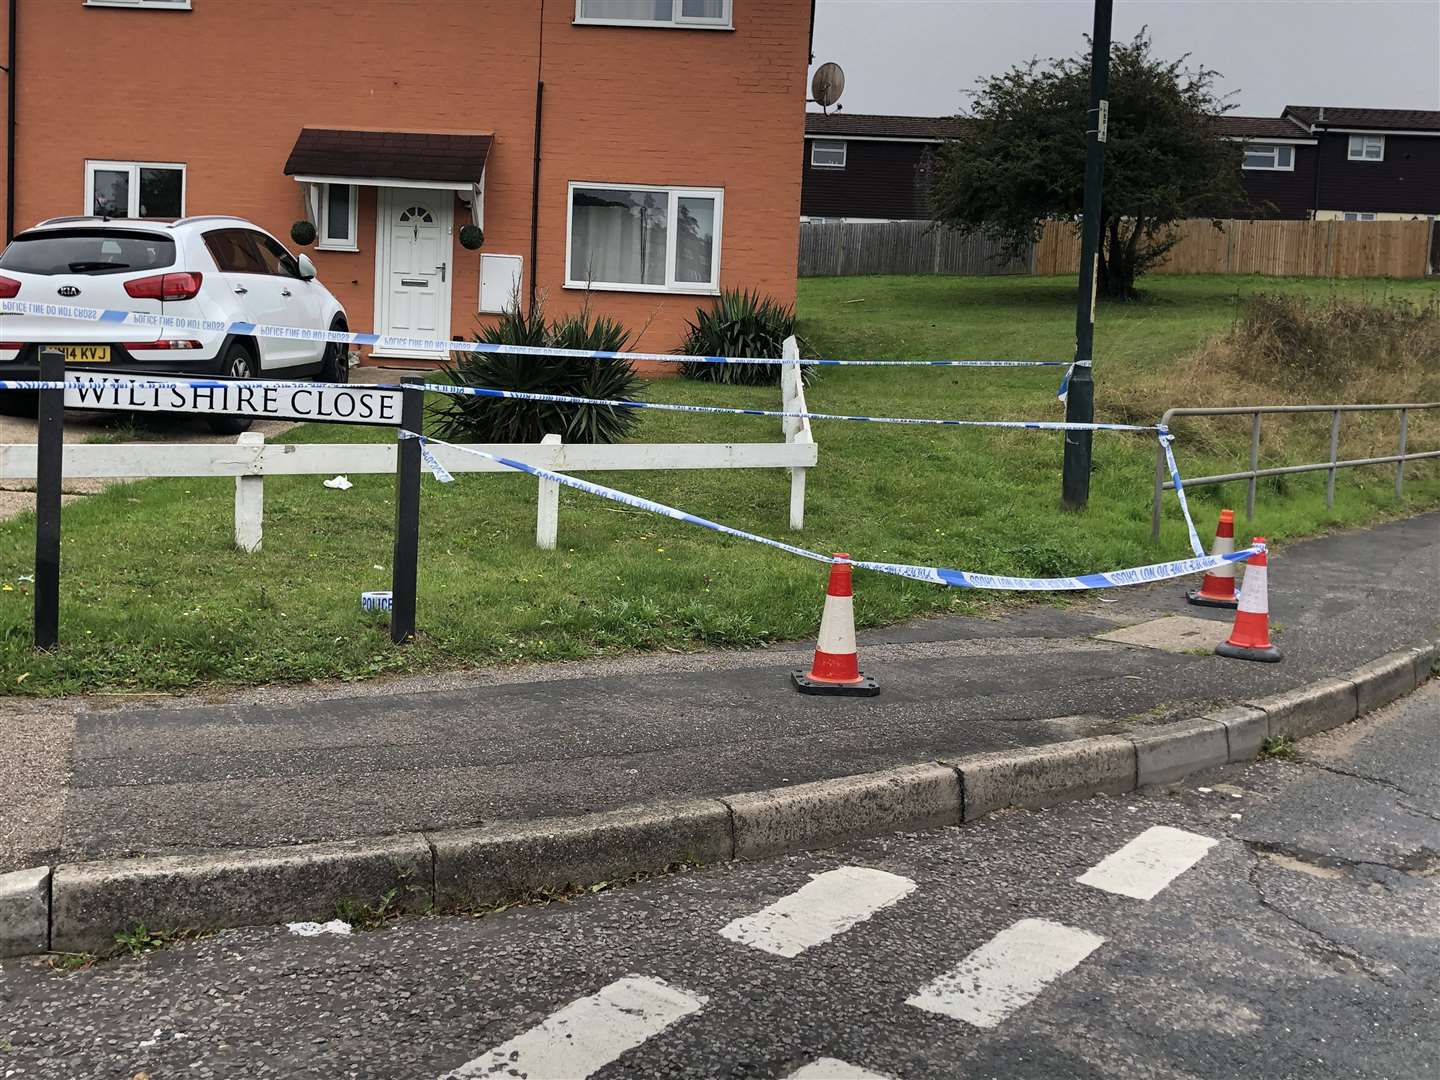 Police cordoned off a large area around Wiltshire Close